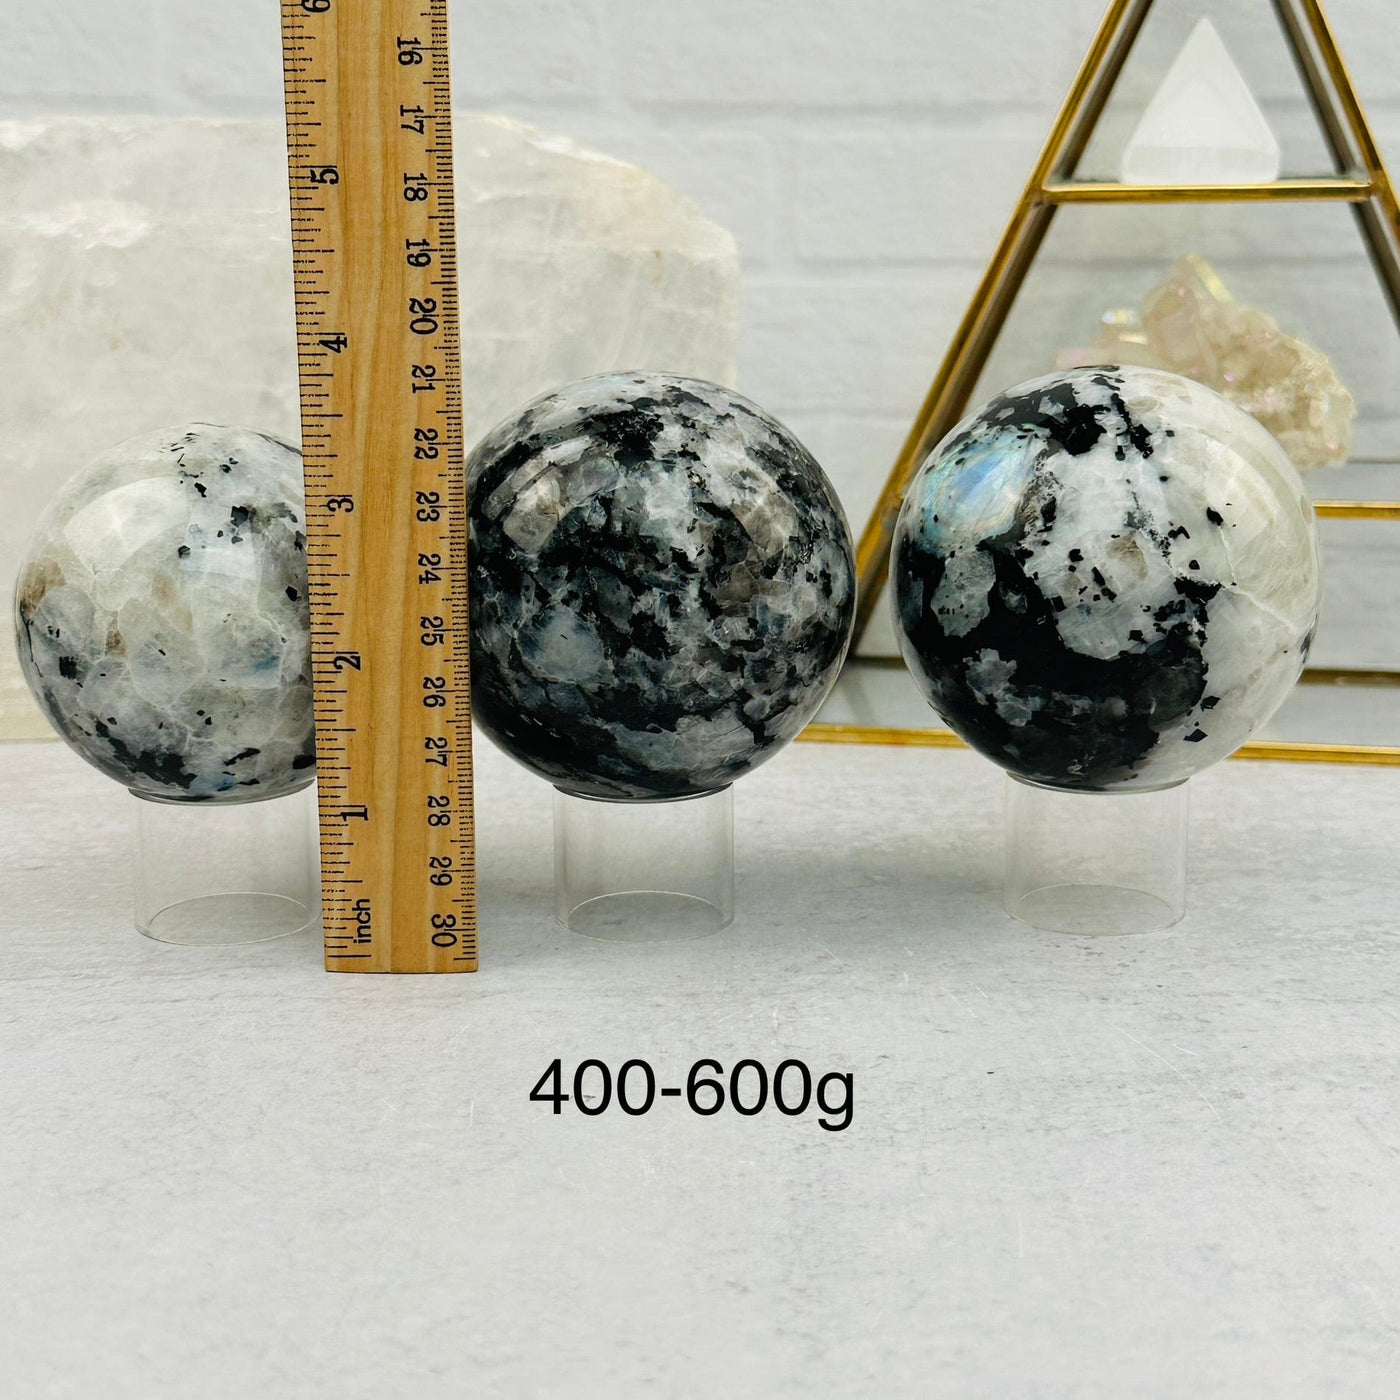 Rainbow Moonstone Sphere by Weight next to a ruler for size reference 